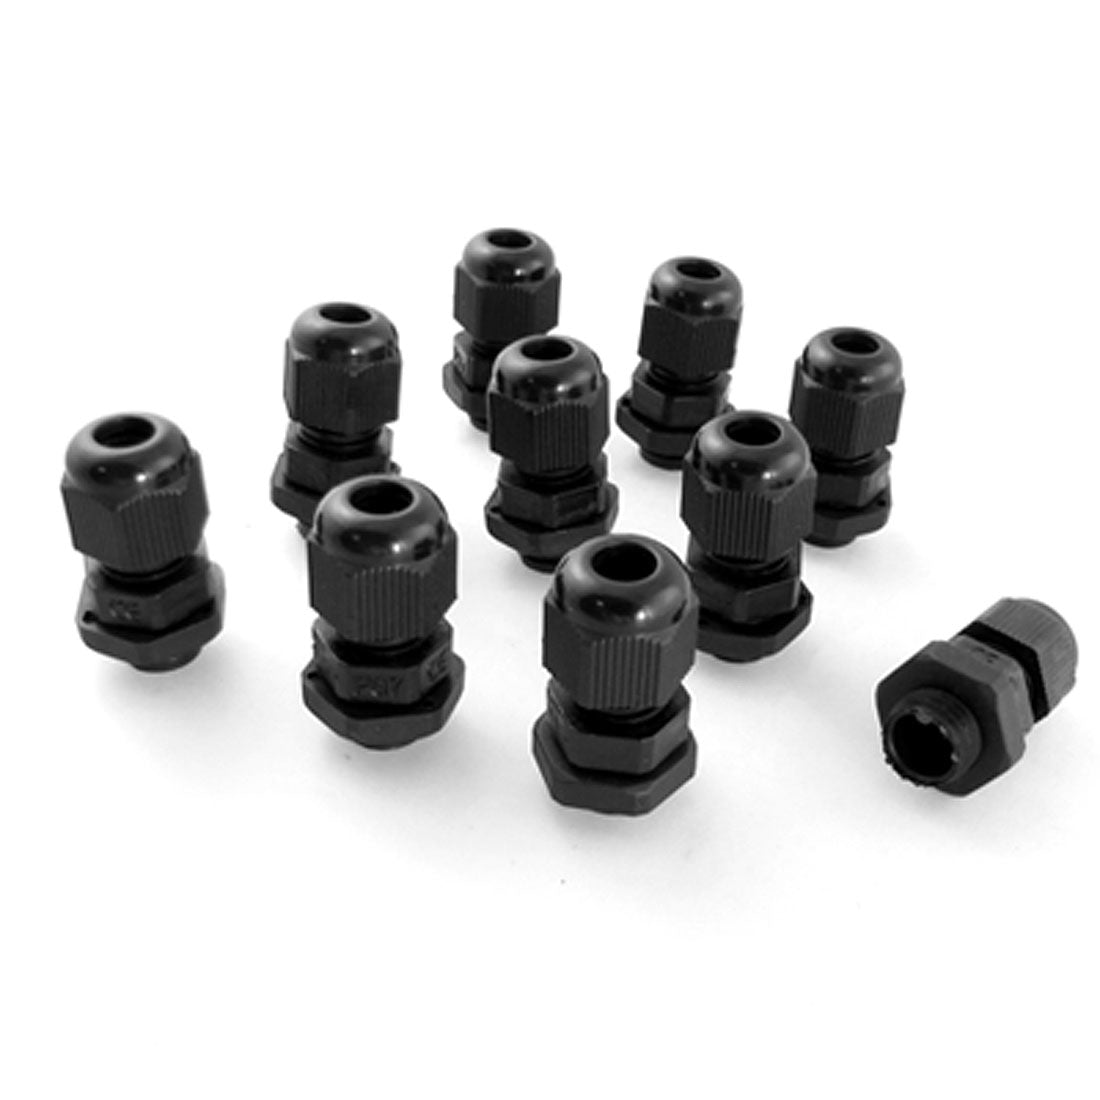 uxcell Uxcell 10 Pcs PG7 Black Plastic Waterproof Connectors Cable Glands